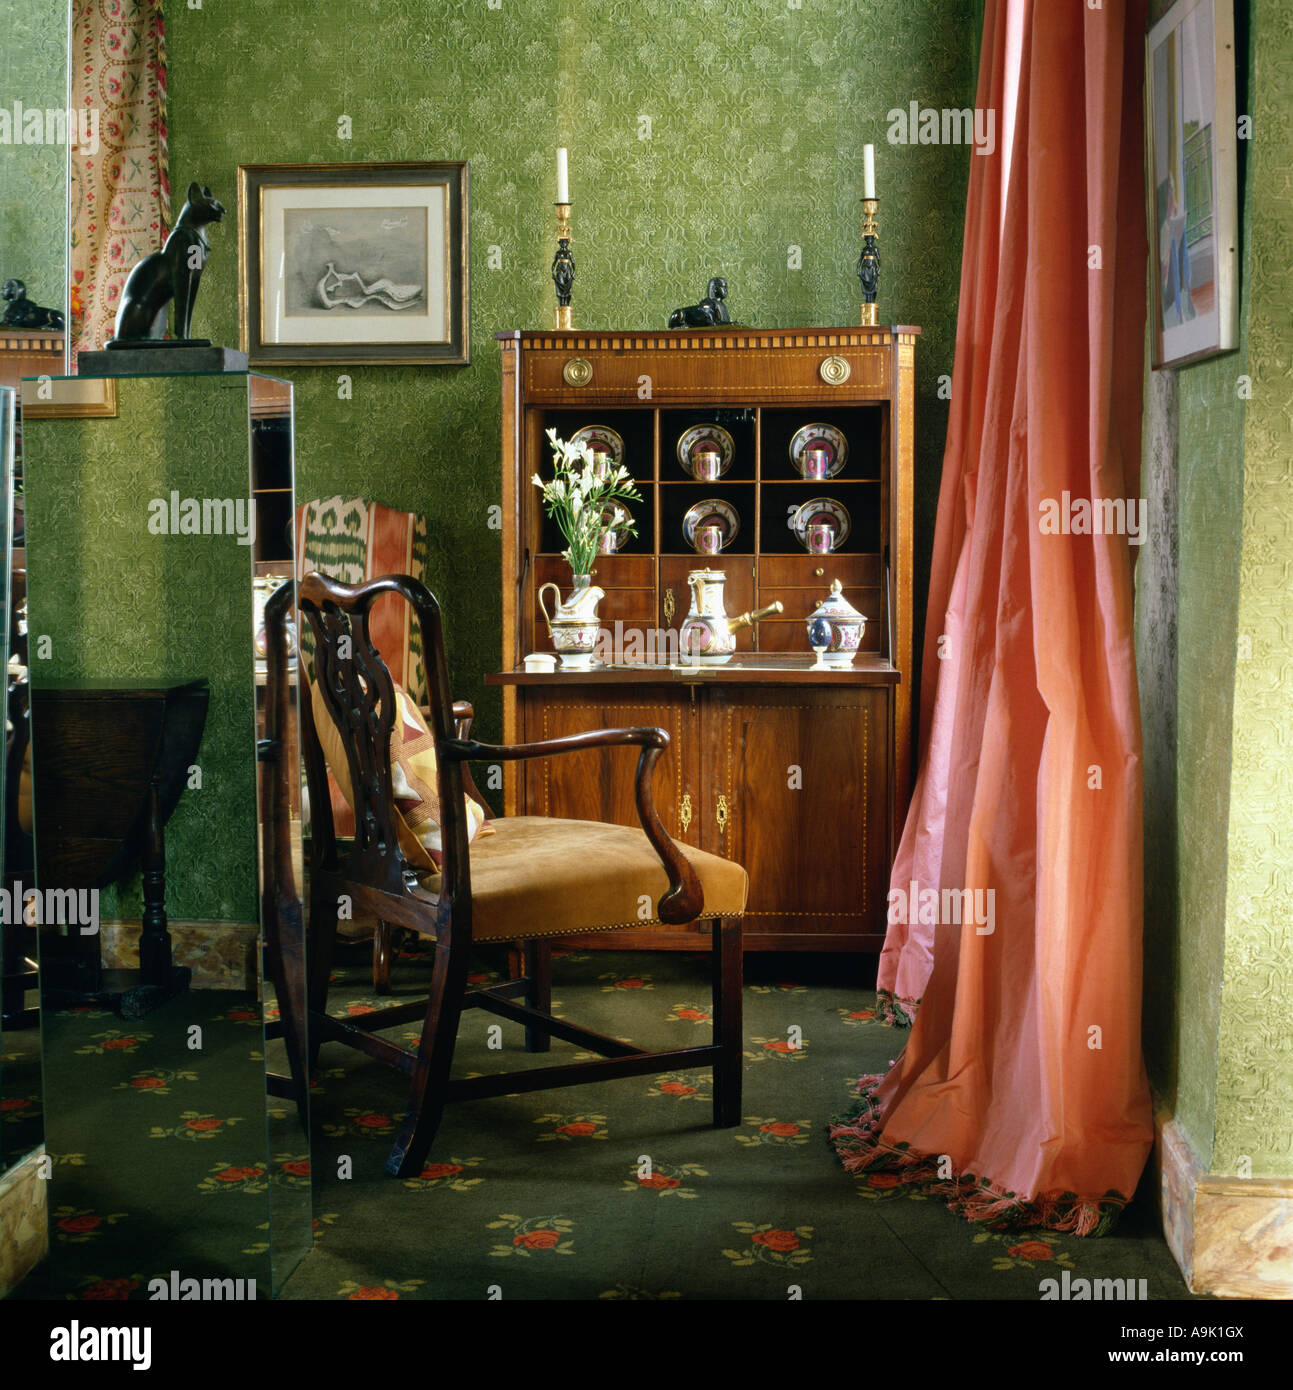 Chair And Desk In Corner Of Eighties Room With Green Wallpaper And